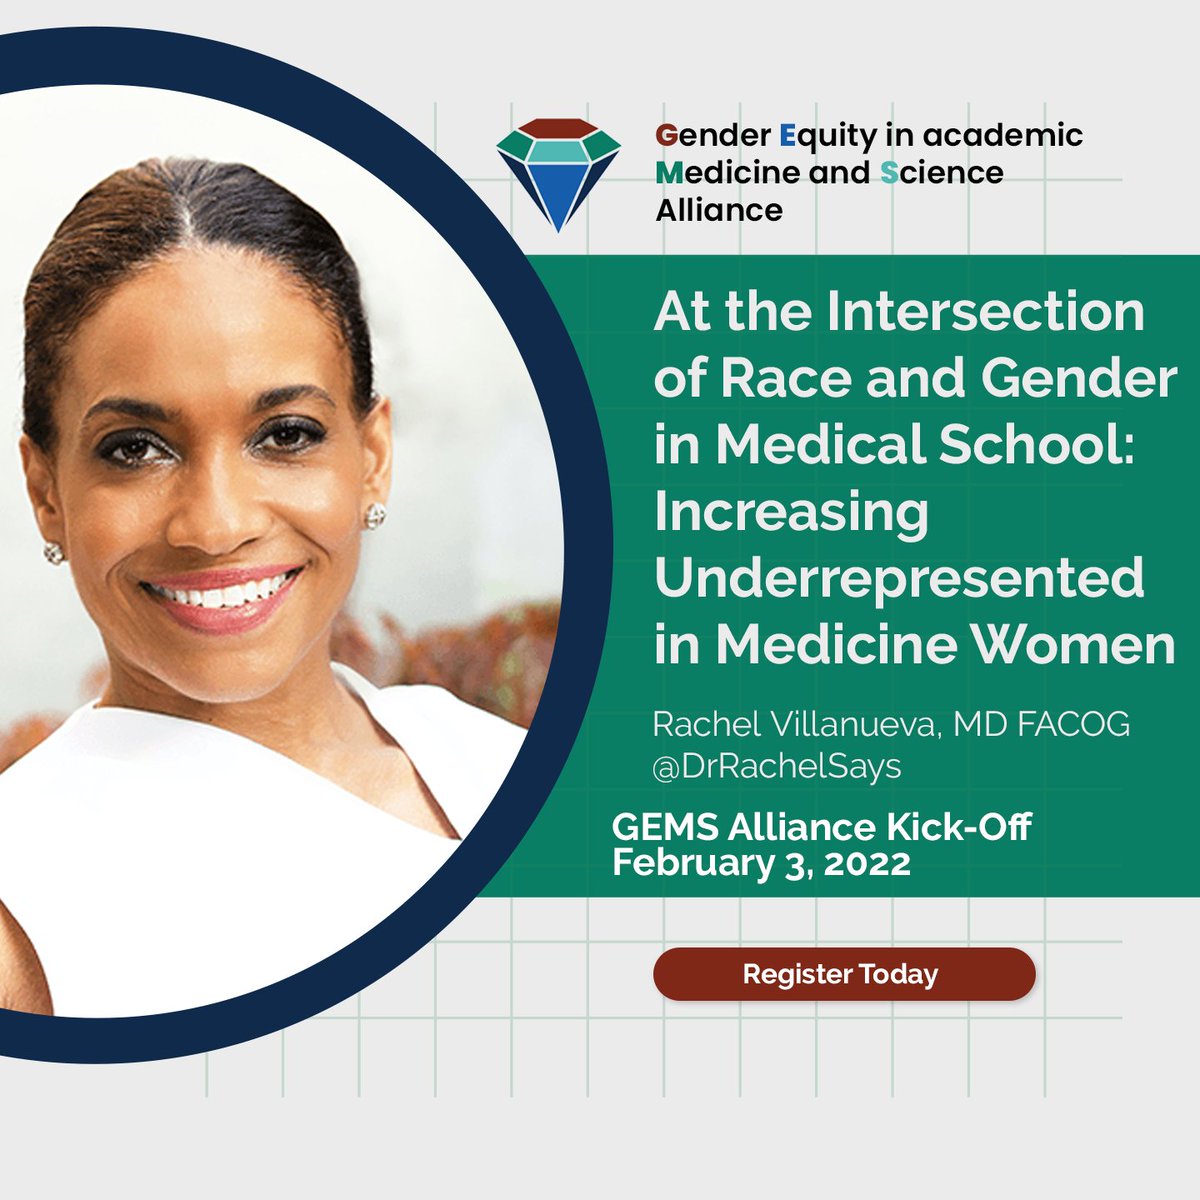 Don’t forget to register for the GEMS Kick-Off webinar taking place TOMORROW! Dr. Rachel Villaneuva @DrRachelSays, President of @NationalMedAssn, will be discussing the need to increase the # of URiM women admitted to medical school. #WomenInMedicine bit.ly/3H5xgPD